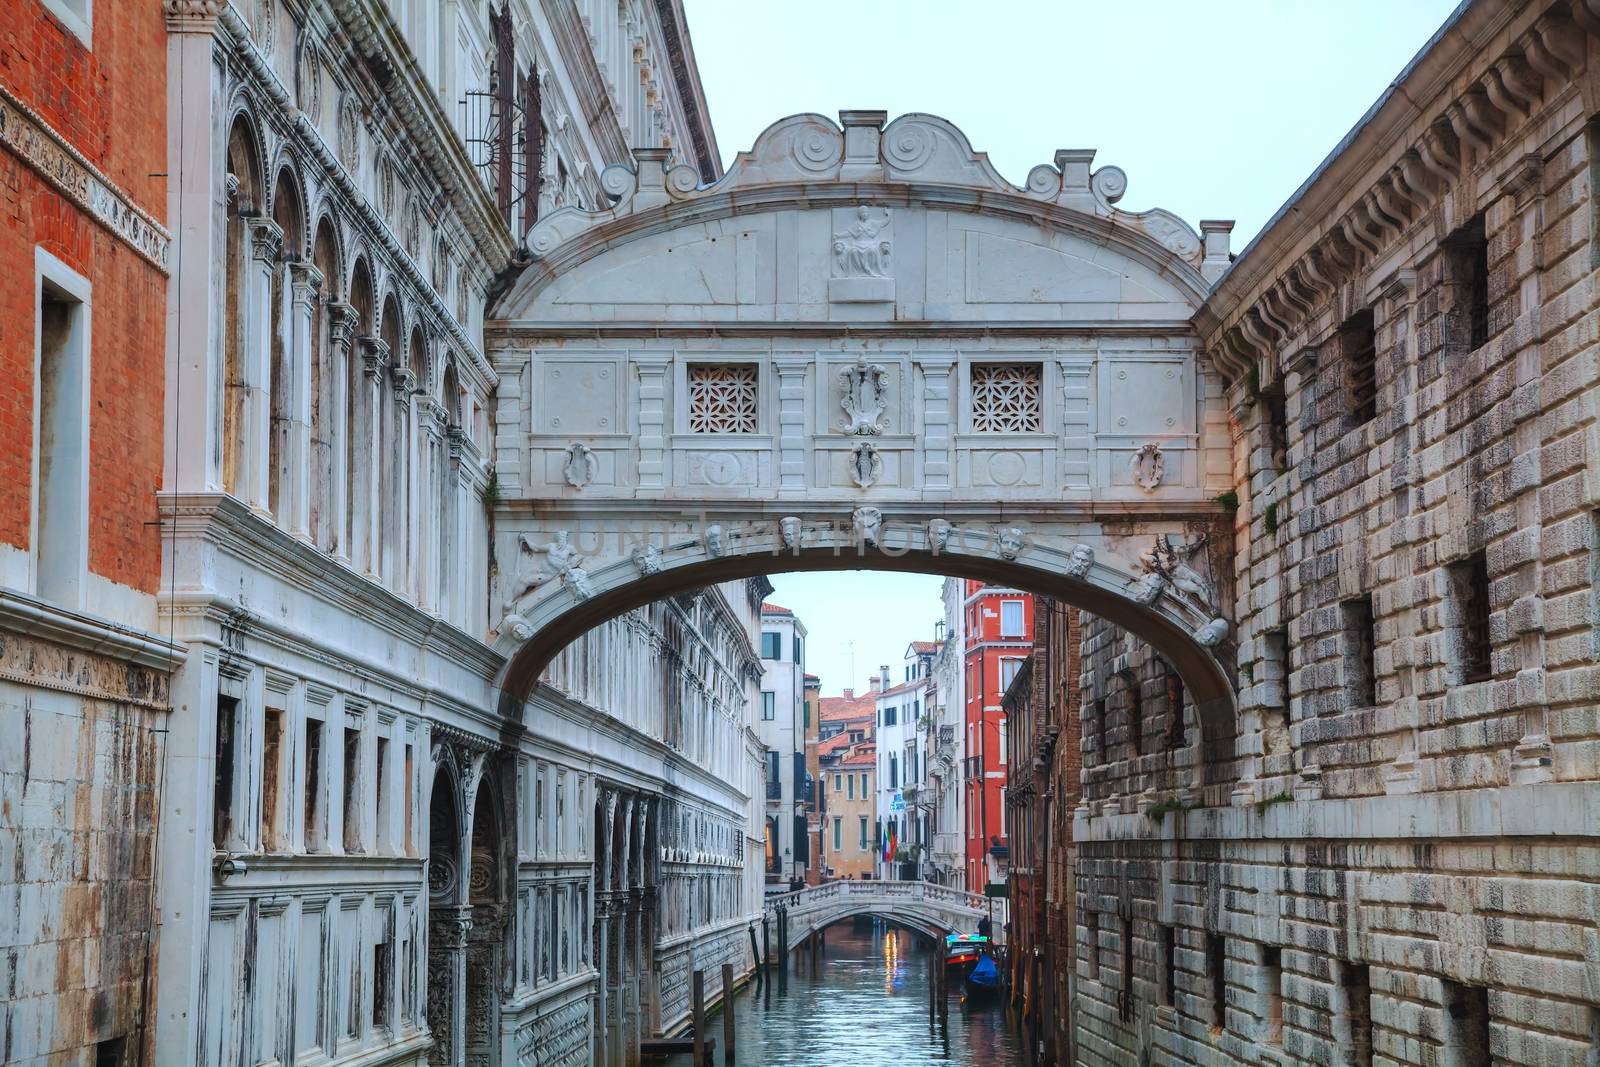 Bridge of sighs in Venice, Italy  by AndreyKr